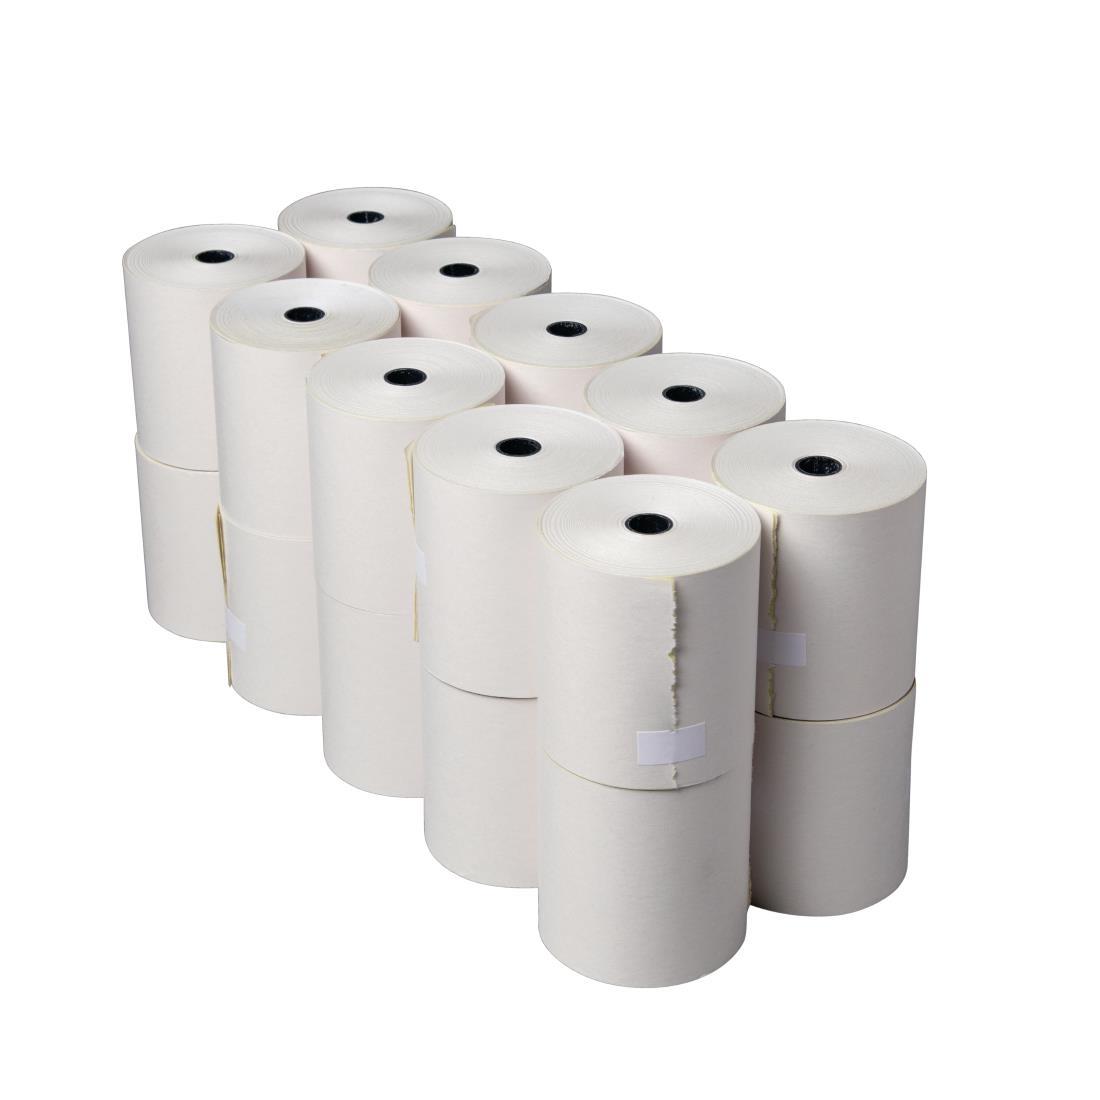 Fiesta Non-Thermal 2ply White and Yellow Till Roll 76 x 70mm (Pack of 20) - DK596  - 3